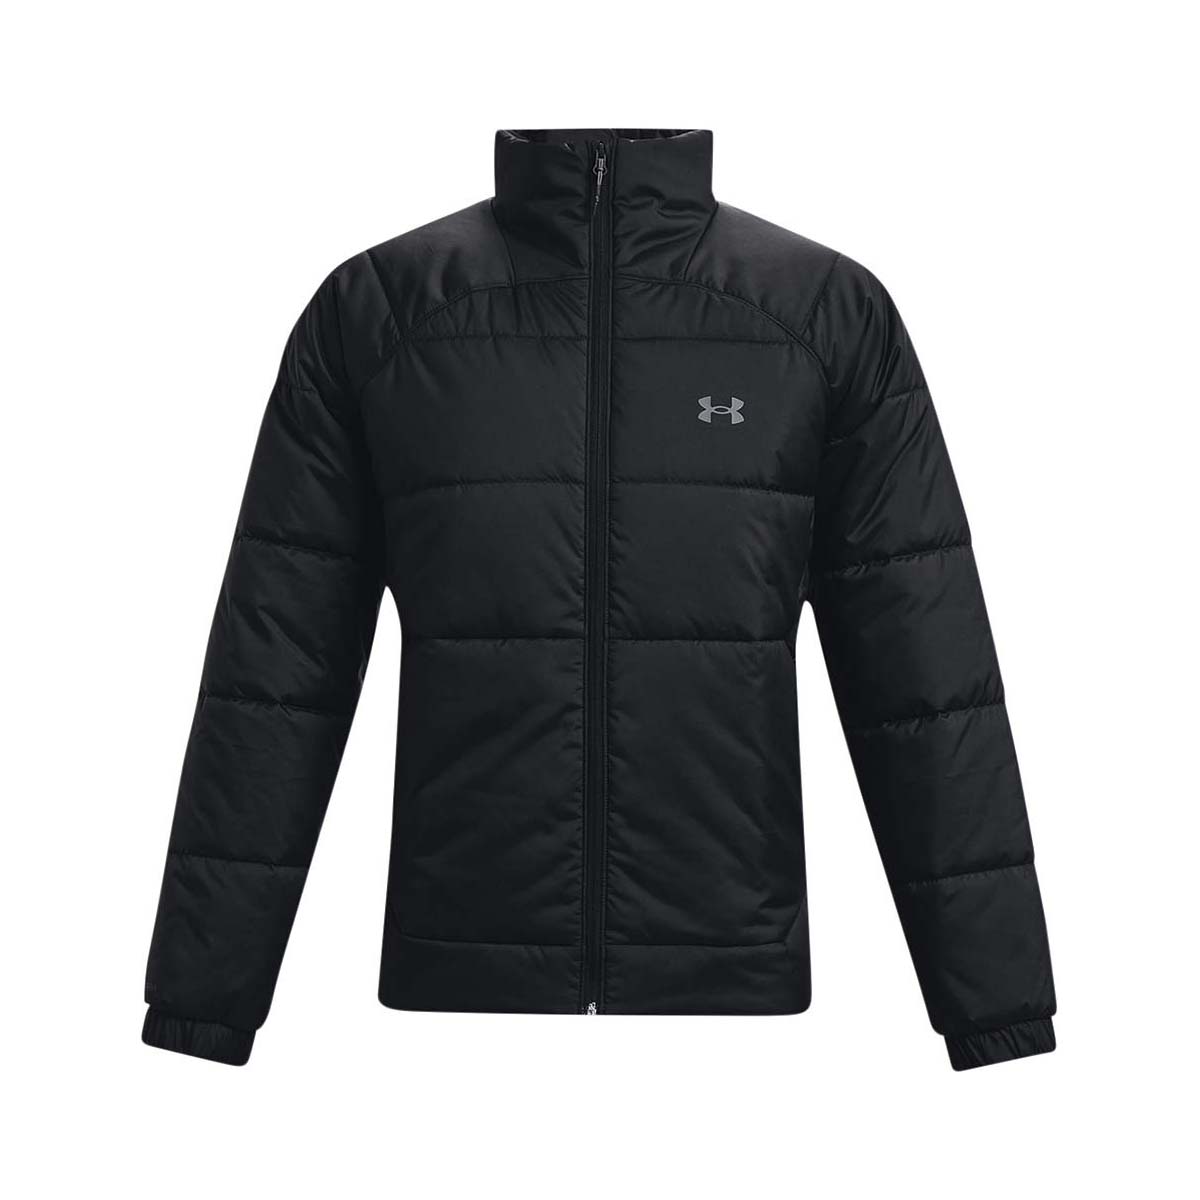 Under Armour Men's ColdGear Insulated Jacket Black / Pitch Grey S @ Club BCF